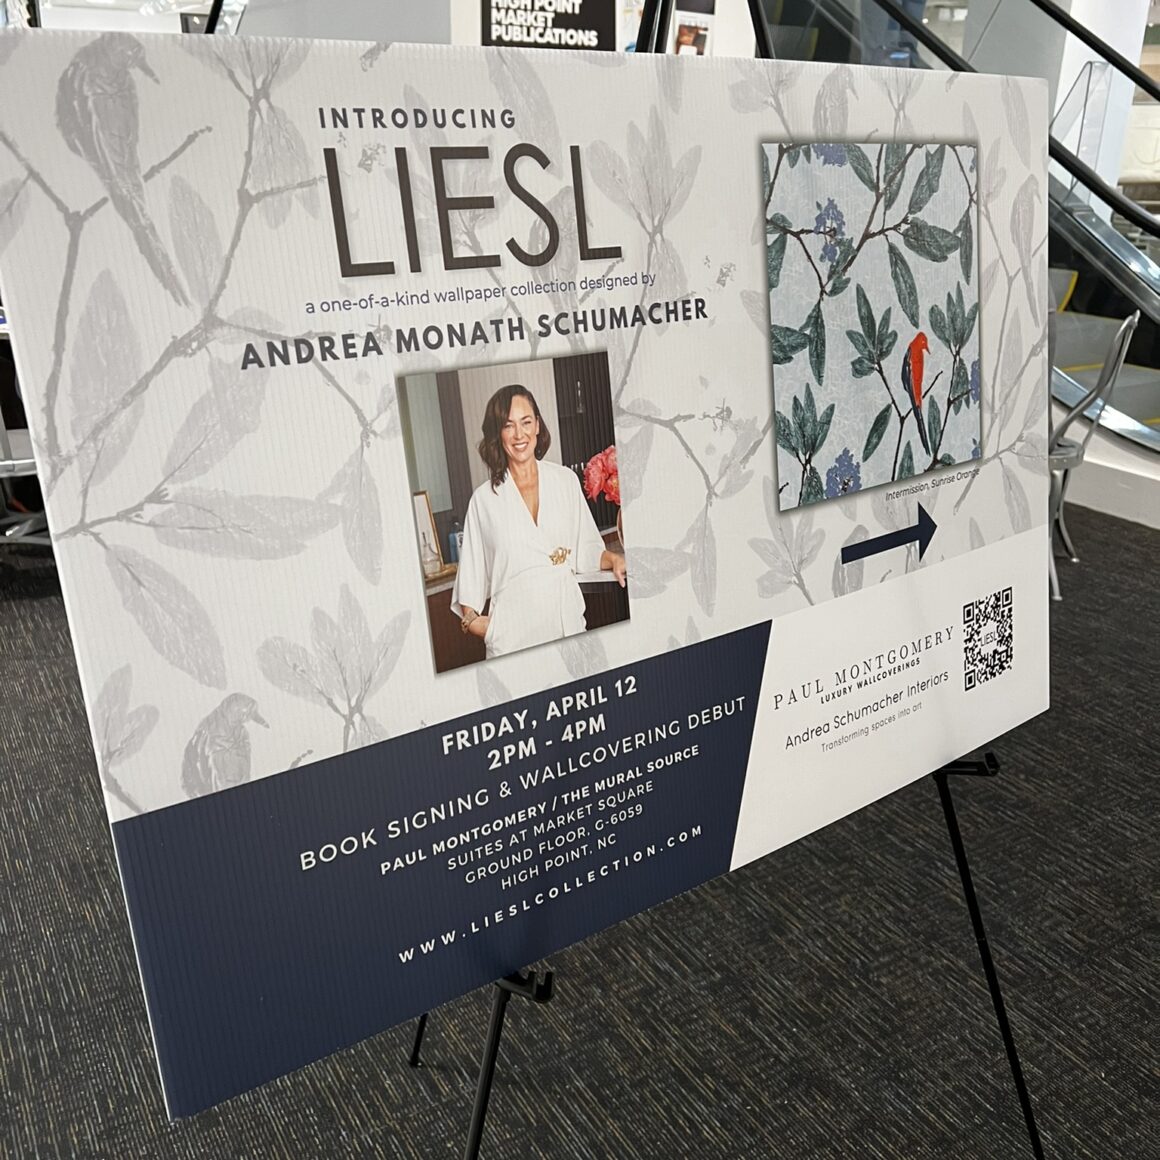 Poster for Andrea schumacher book signing and Liesl line launch